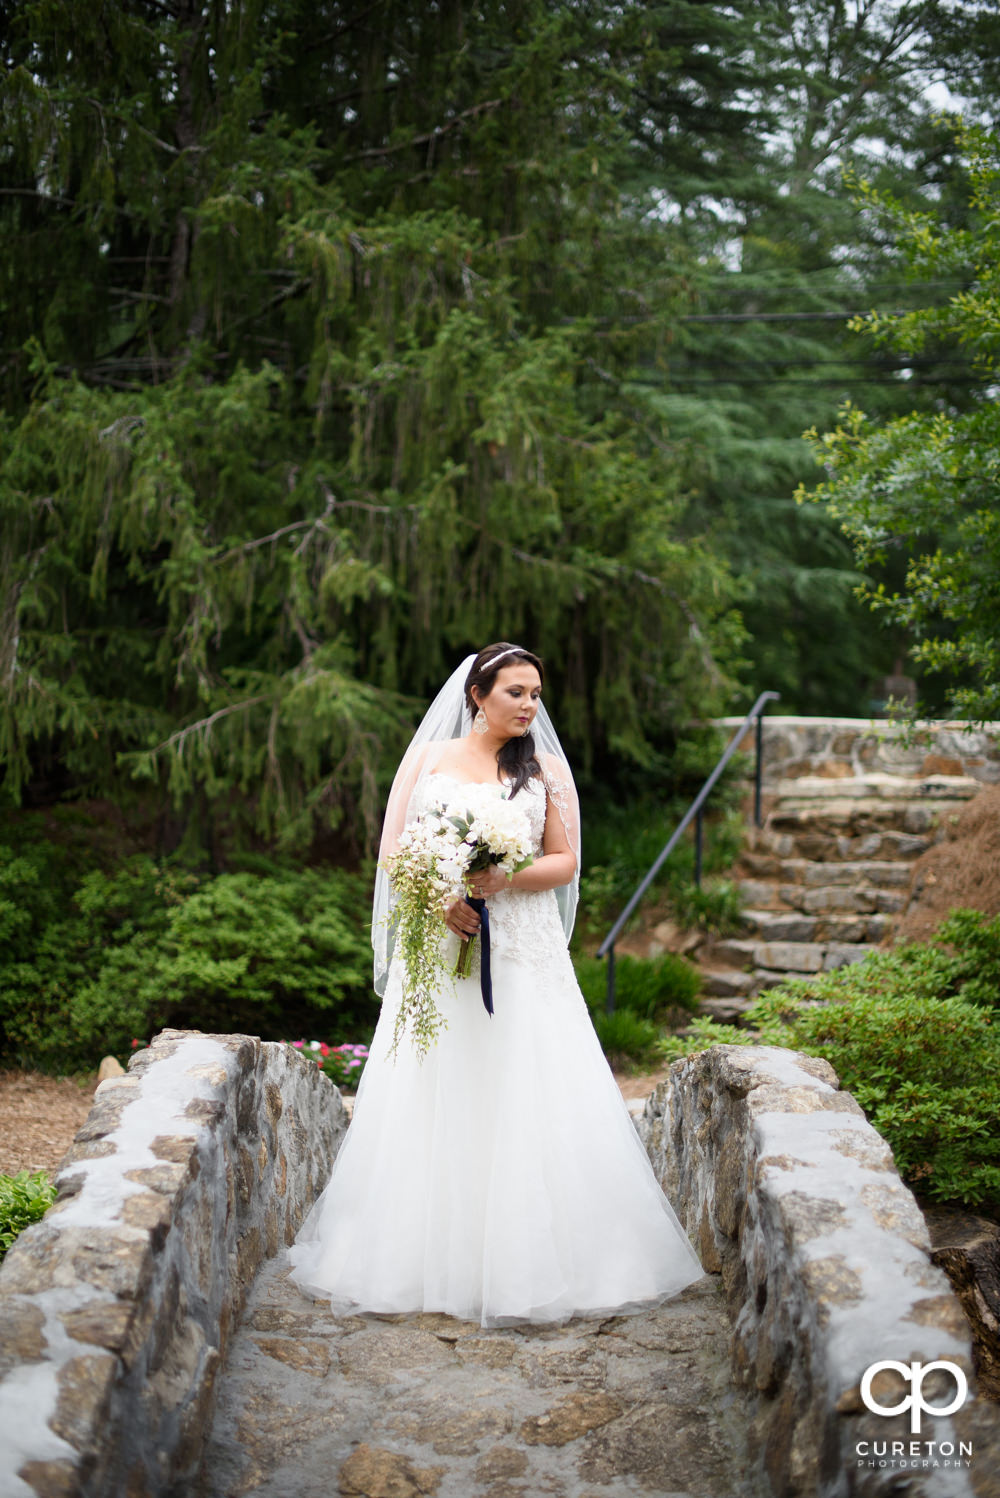 Bride on the stone bridge during her bridal portrait session in downtown Greenville.